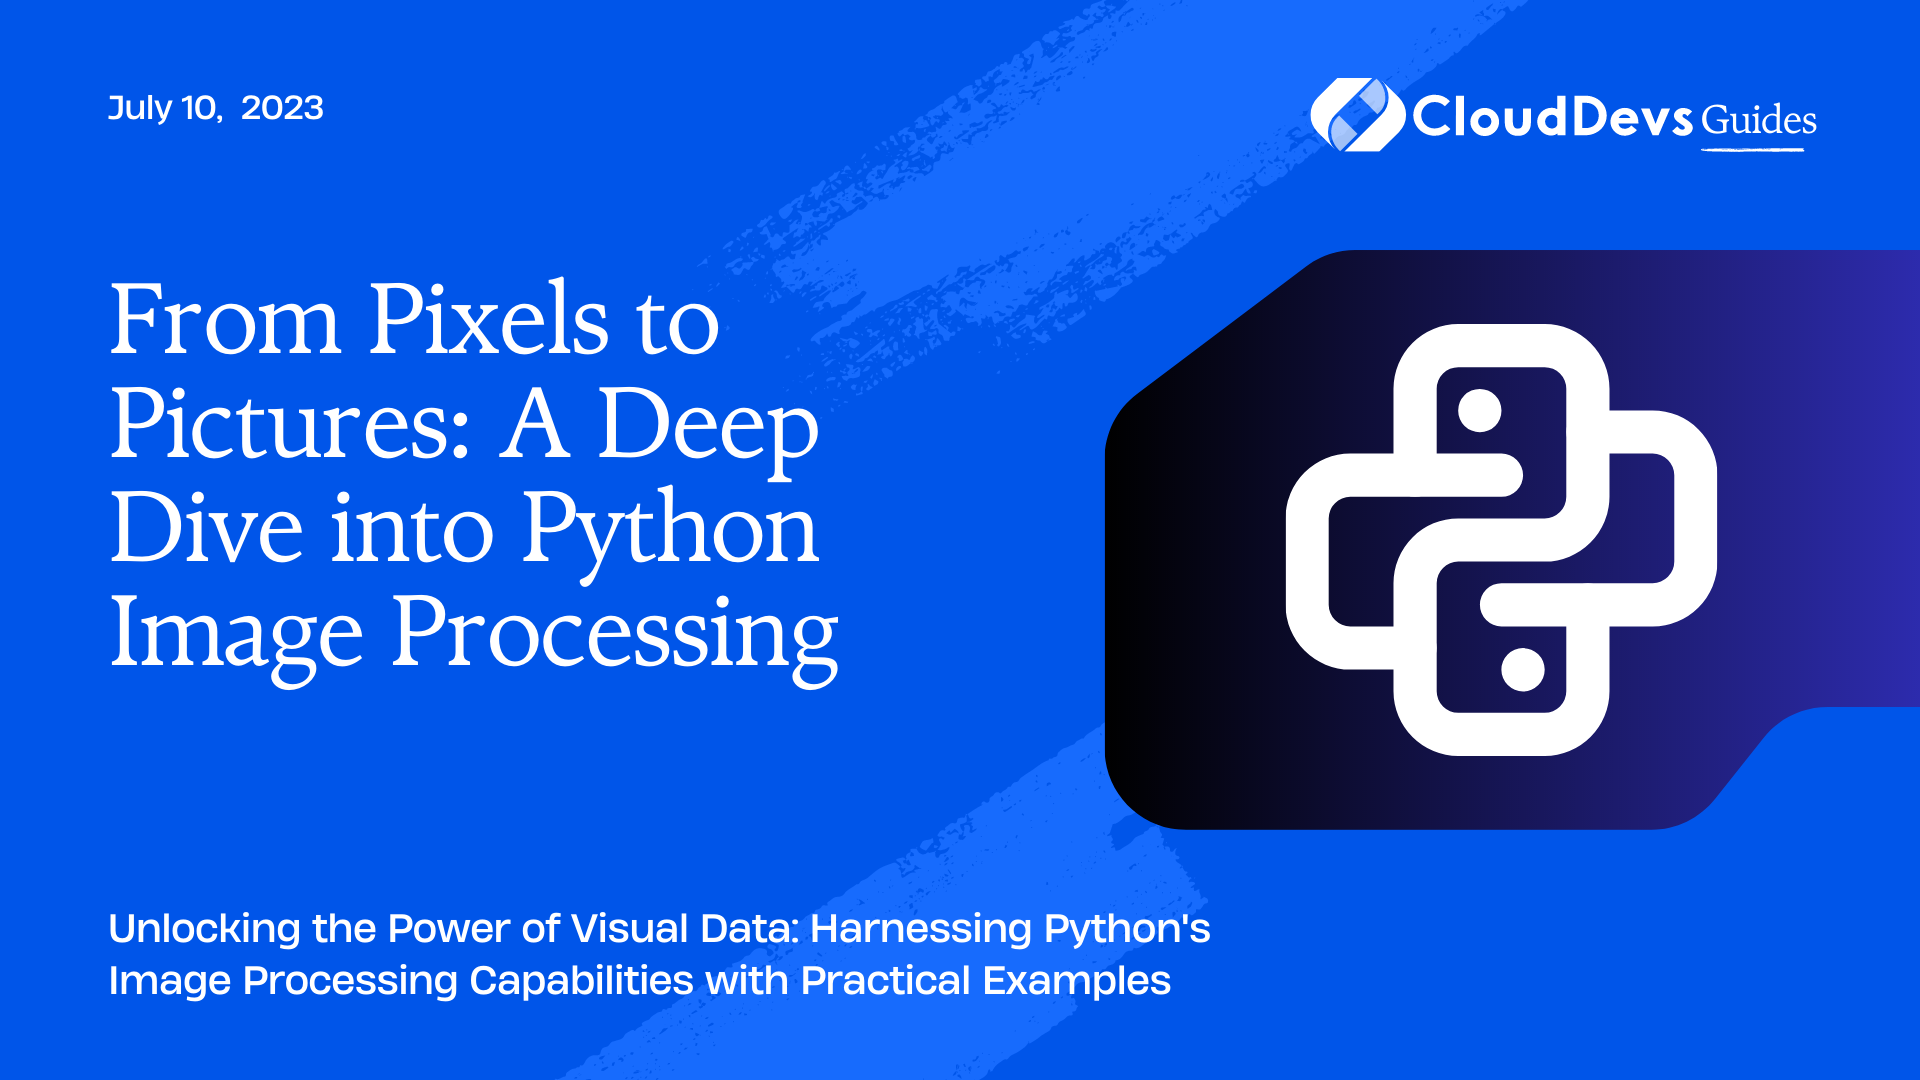 From Pixels to Pictures: A Deep Dive into Python Image Processing